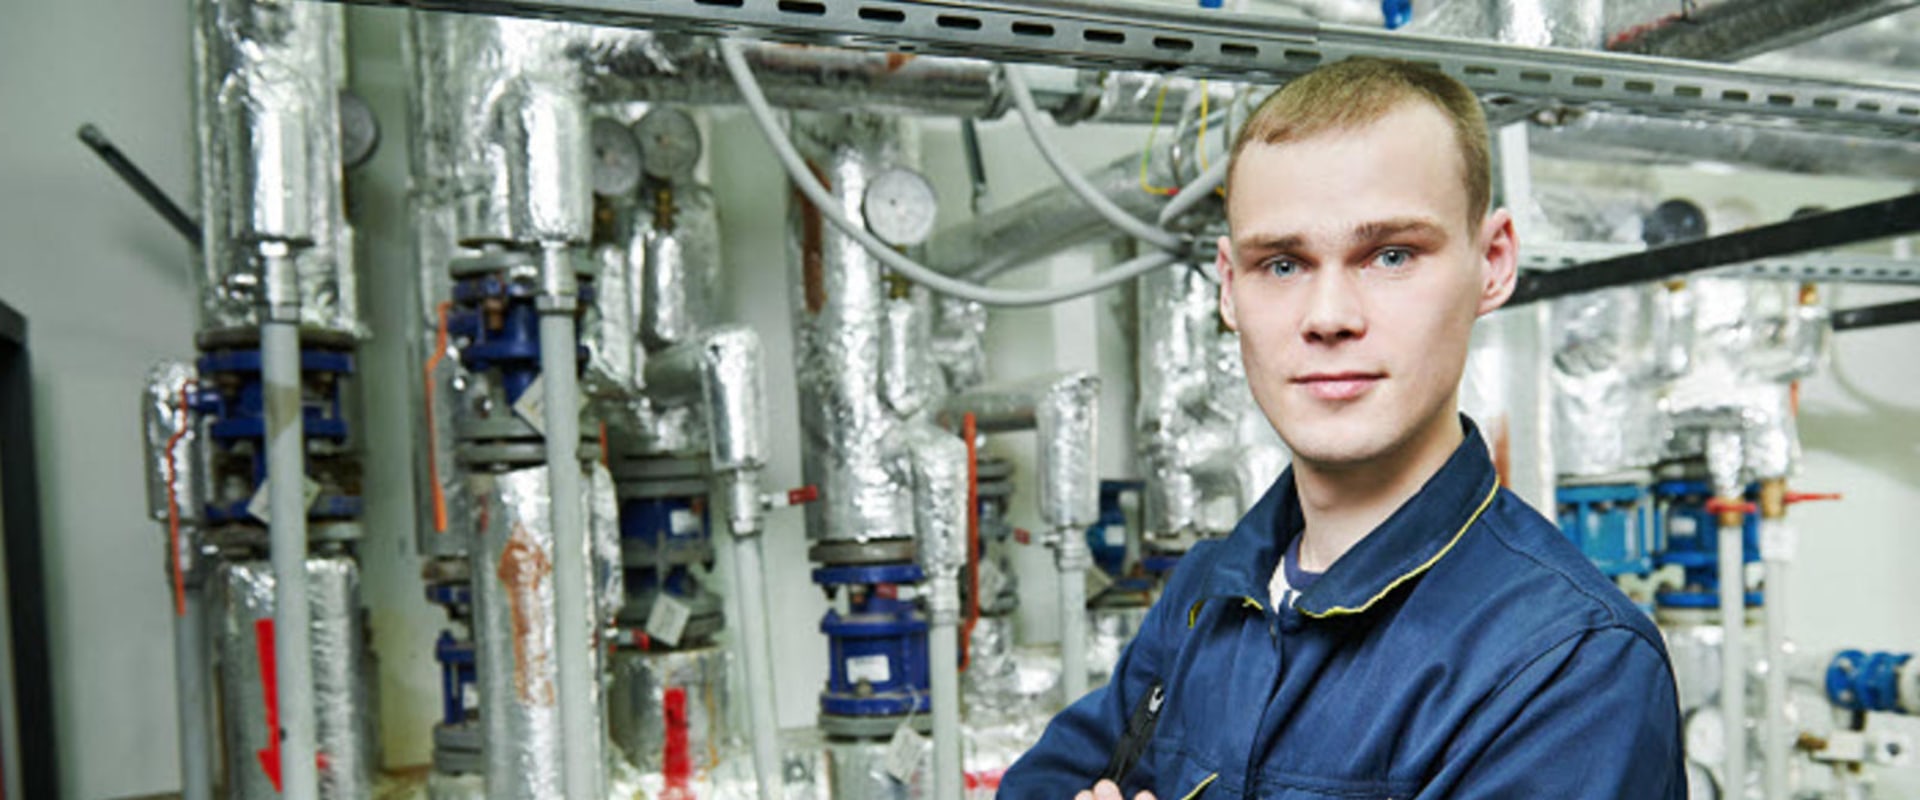 Becoming an HVAC Repair Technician: What Training is Needed?